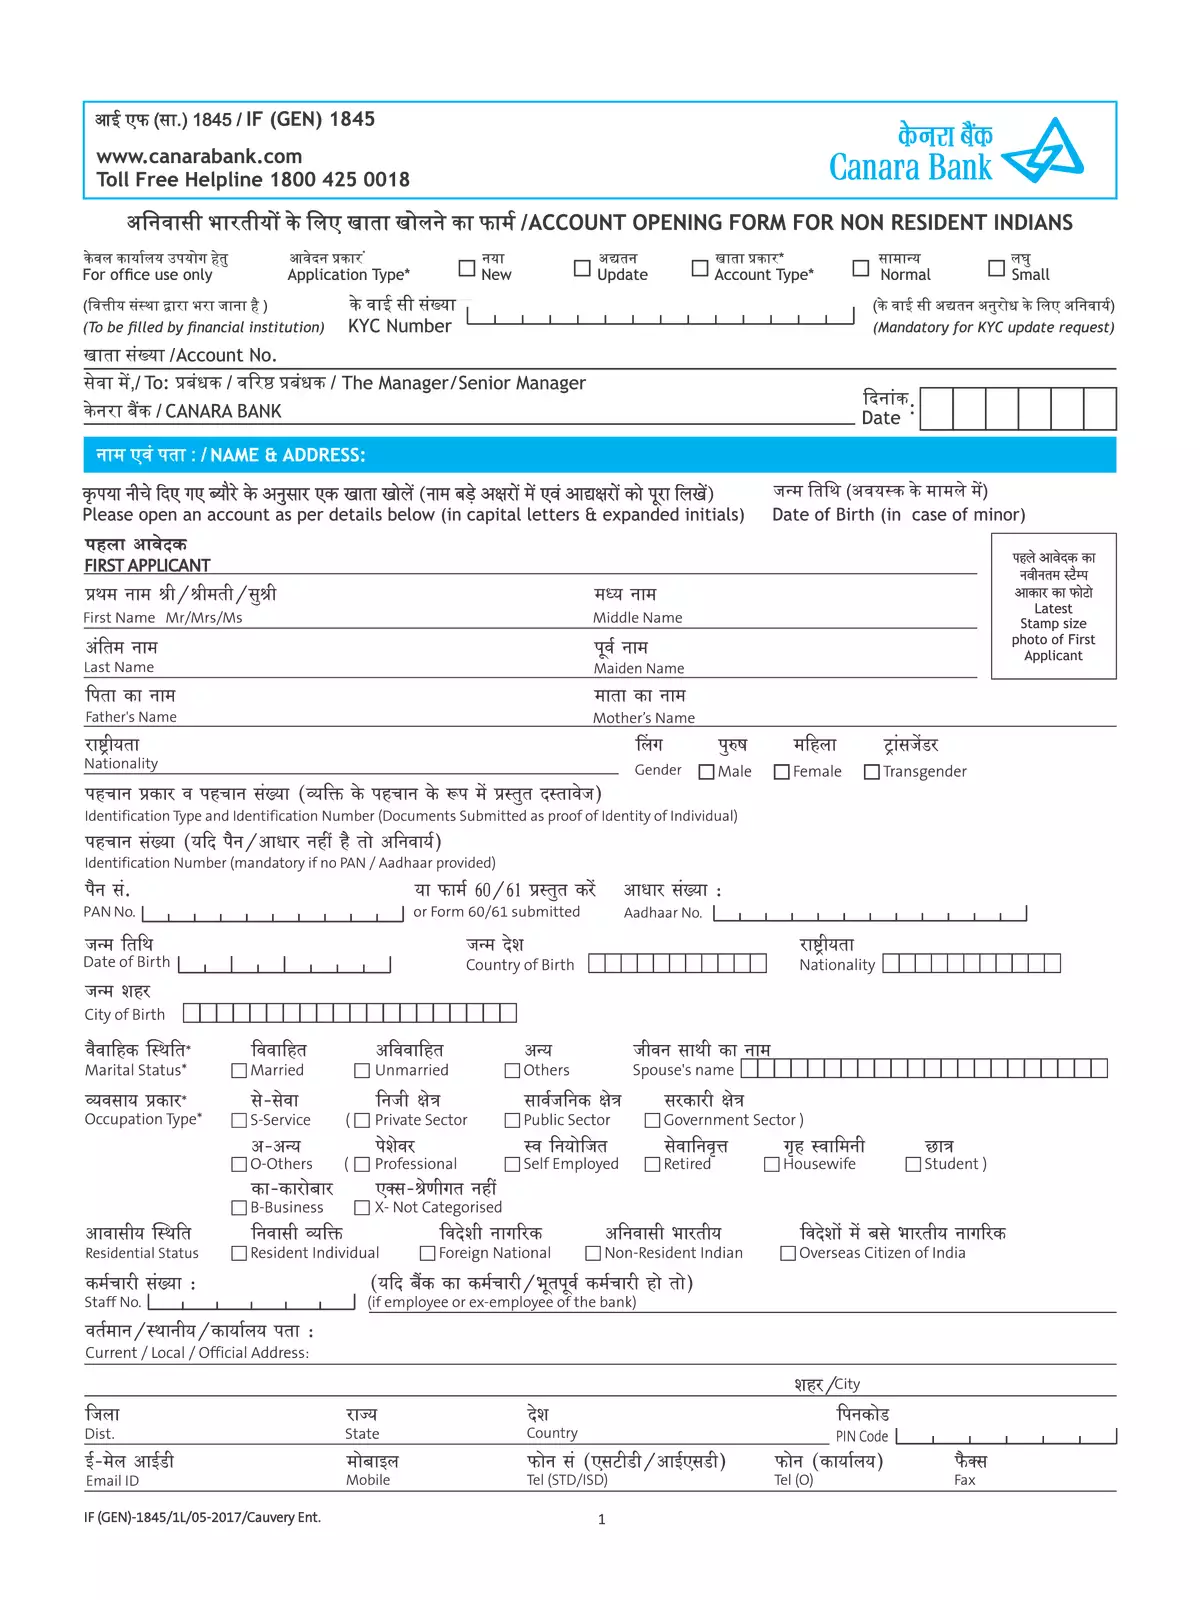 Syndicate Bank Account Opening Form